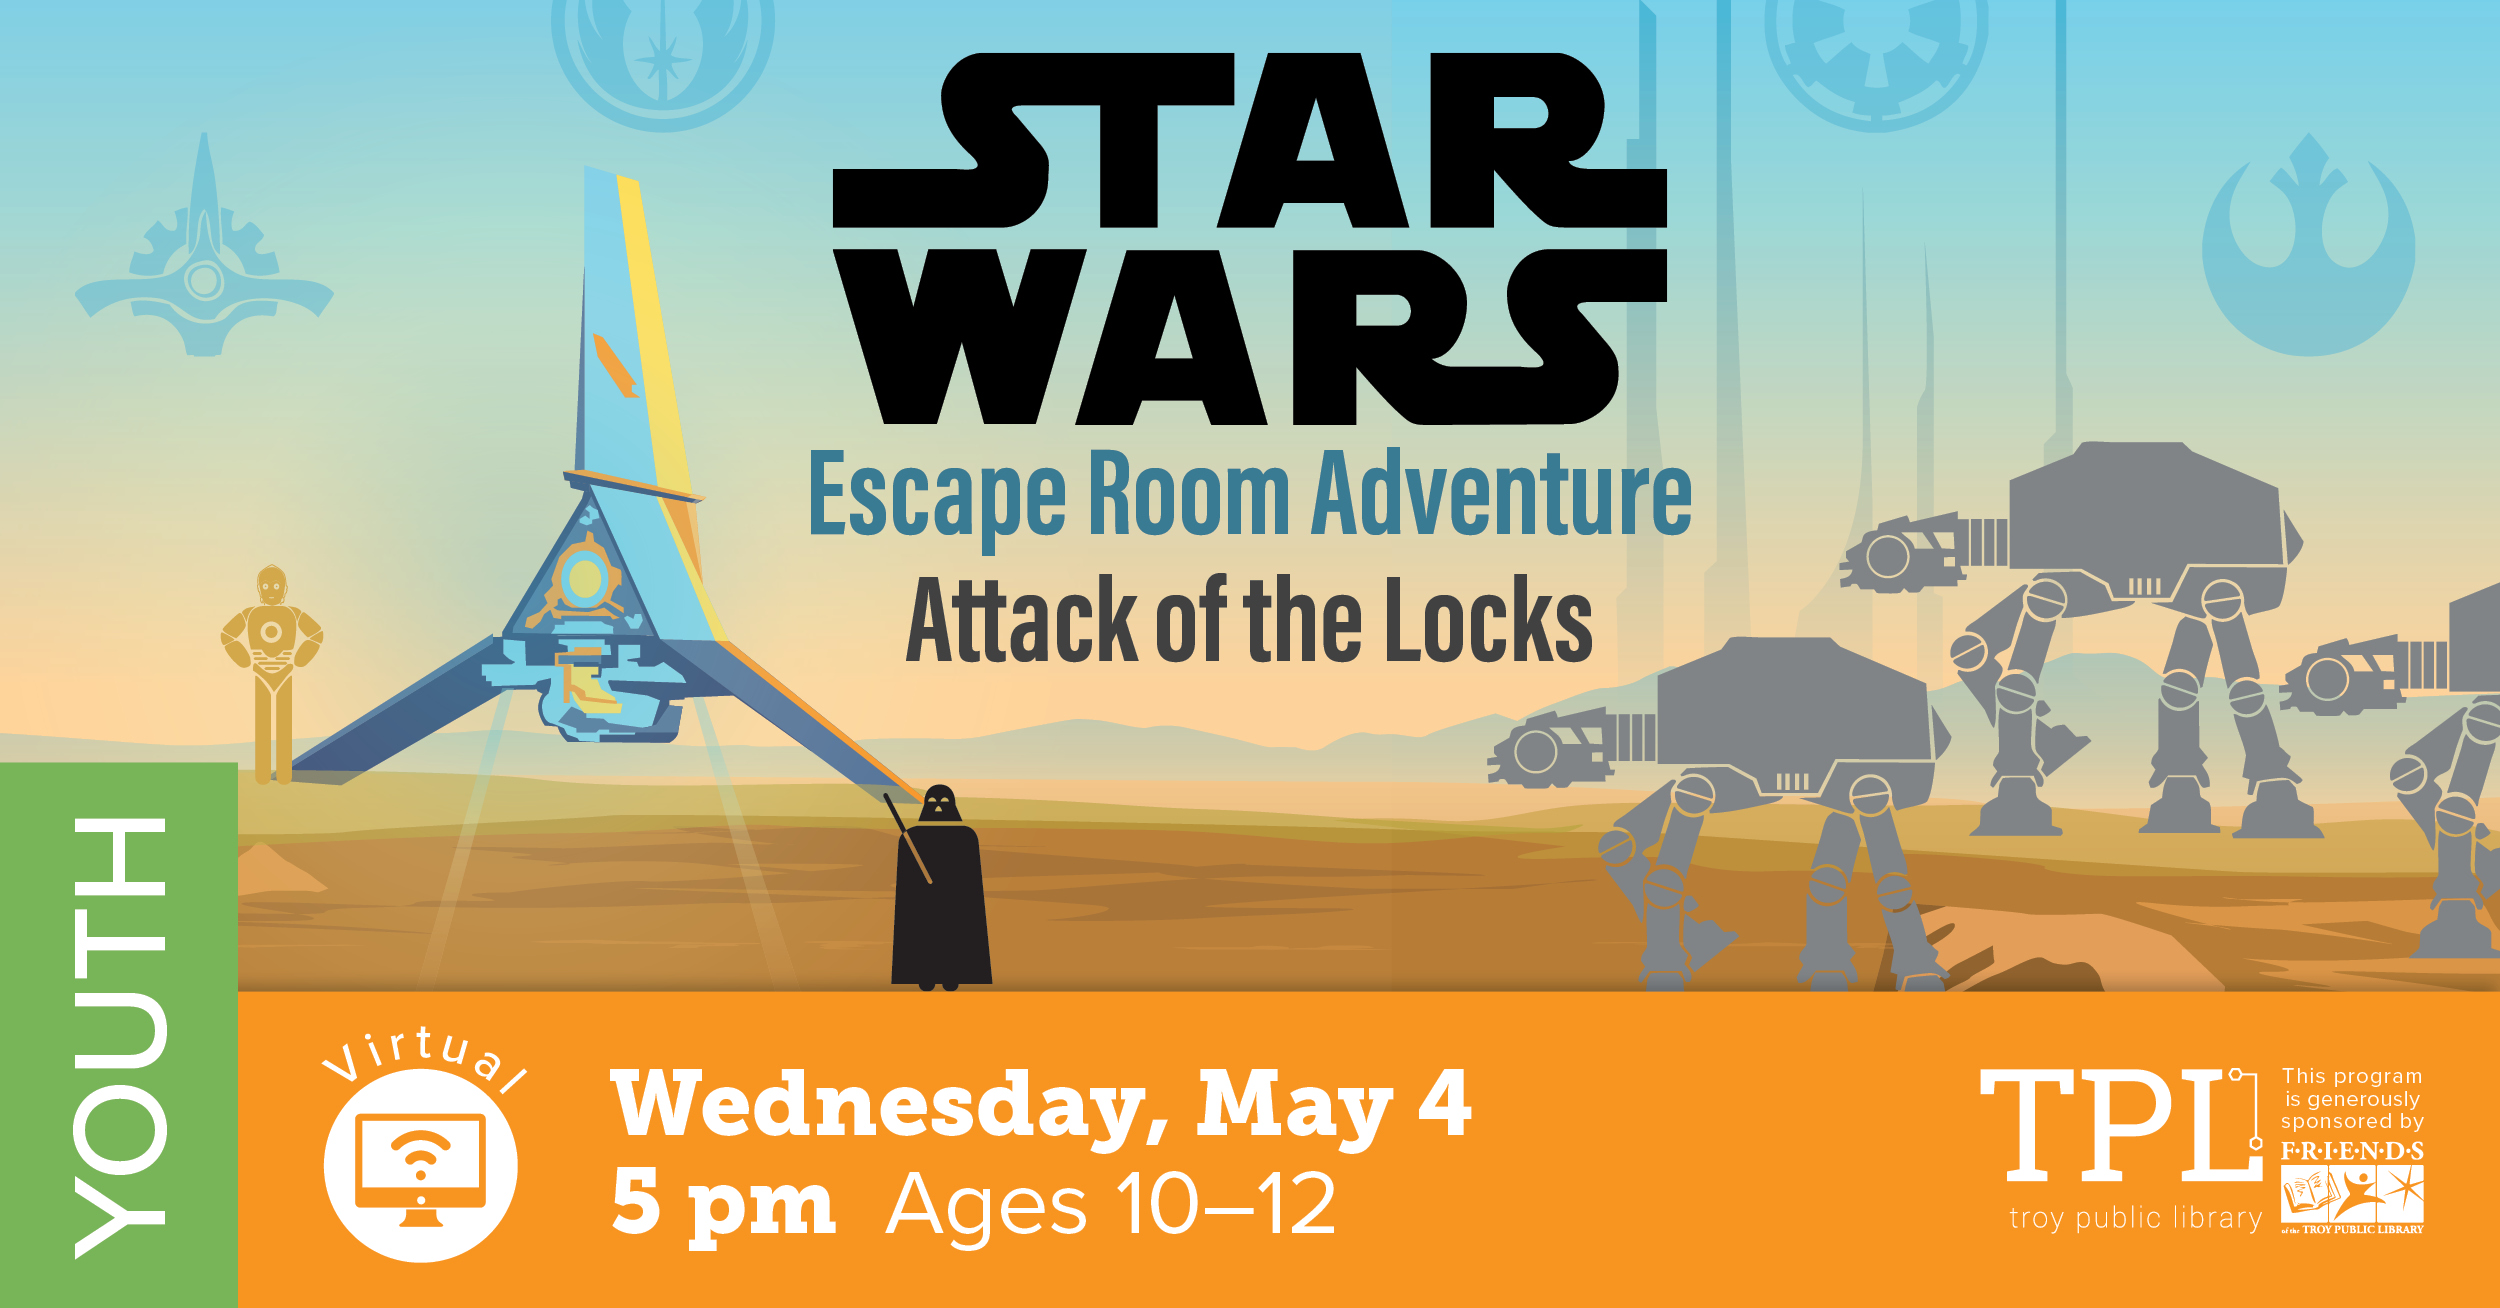 Star Wars Escape Room Adventure Attack of the Locks. Virtual Program on Wednesday, May 4th at 5 pm for ages 10 to 12.  Sponsored by the Friends of the Troy Public Library. 